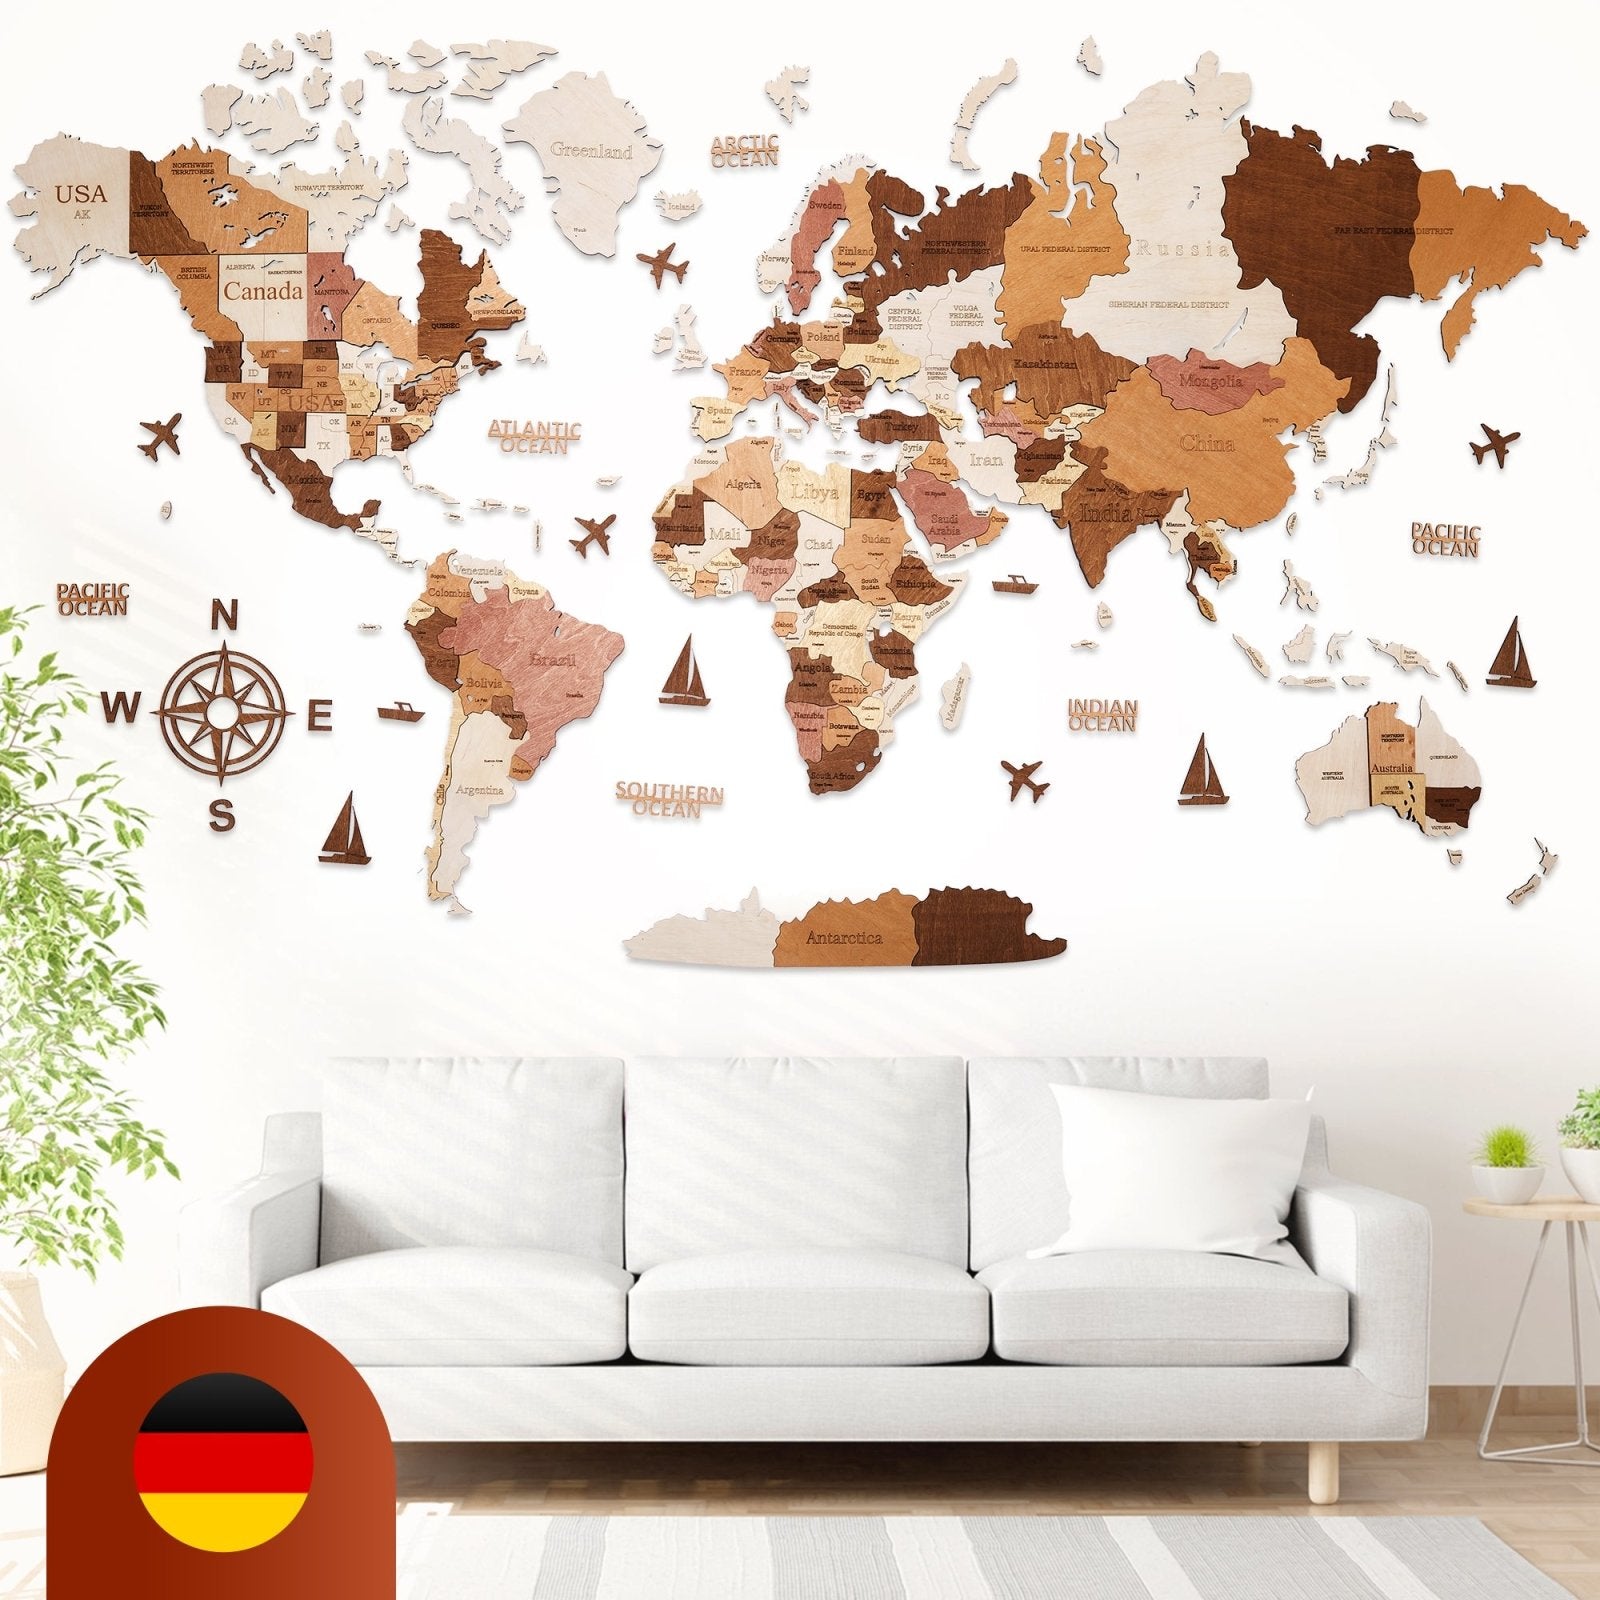 Wooden World Map, Wood Map, Wall Art Decor, Map of the World, 3D World Map,  Large Map for Wall, Brown Color Wood Map, 3D Wood World Map (Large Map 